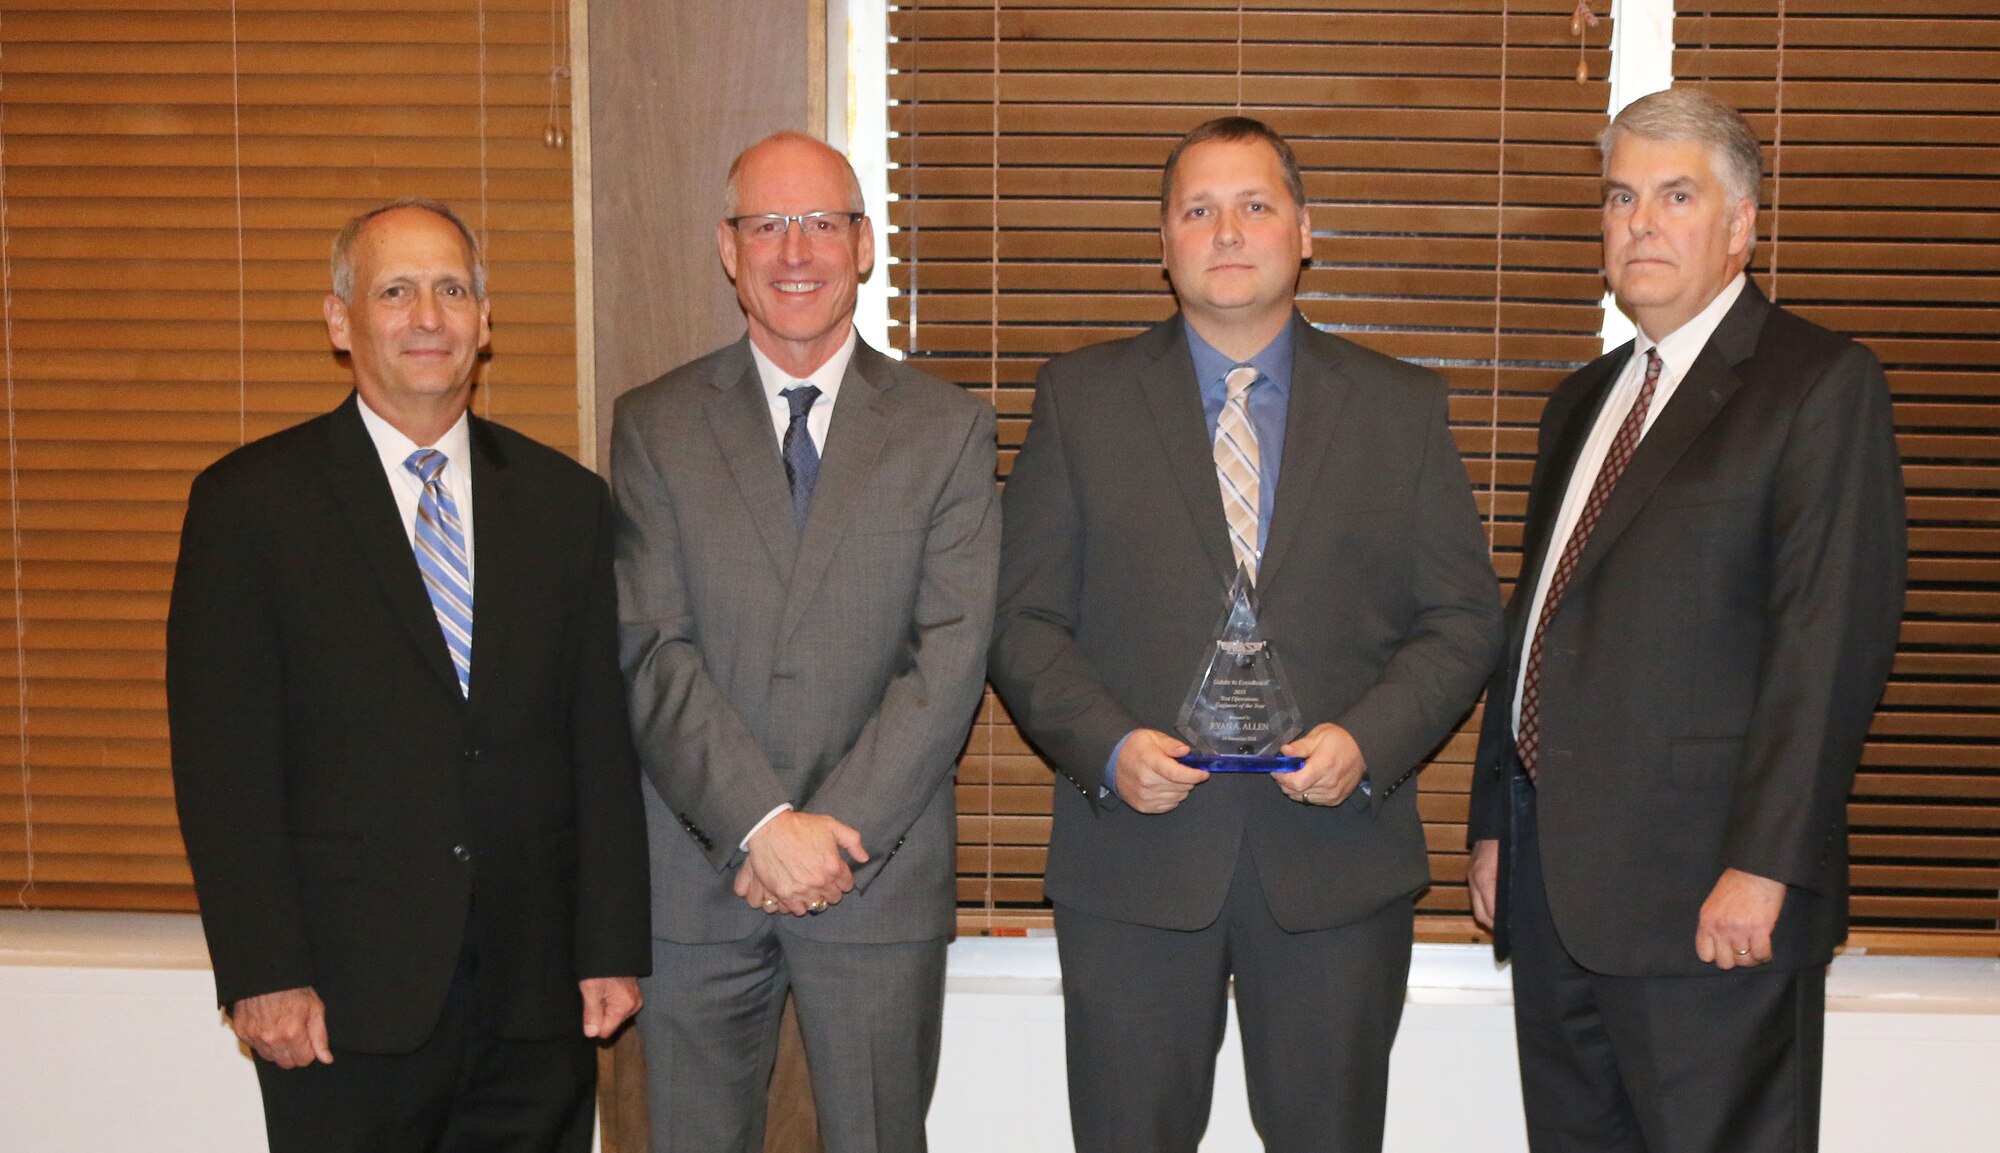 Senior Test Operations Engineer Ryan Allen (third from left) receives the Test Operations Engineer of the Year Award during the National Aerospace Solutions, LLC Salute to Excellence Annual Award Ceremony Nov. 14, 2018, at the Arnold Lakeside Center, Arnold Air Force Base, Tenn. Also pictured from left is NAS Deputy General Manager Michael Belzil, NAS General Manager Richard Tighe and NAS Test and Sustainment Engineering Manager Jeff Henderson. (U.S. Air Force photo by Bradley Hicks)